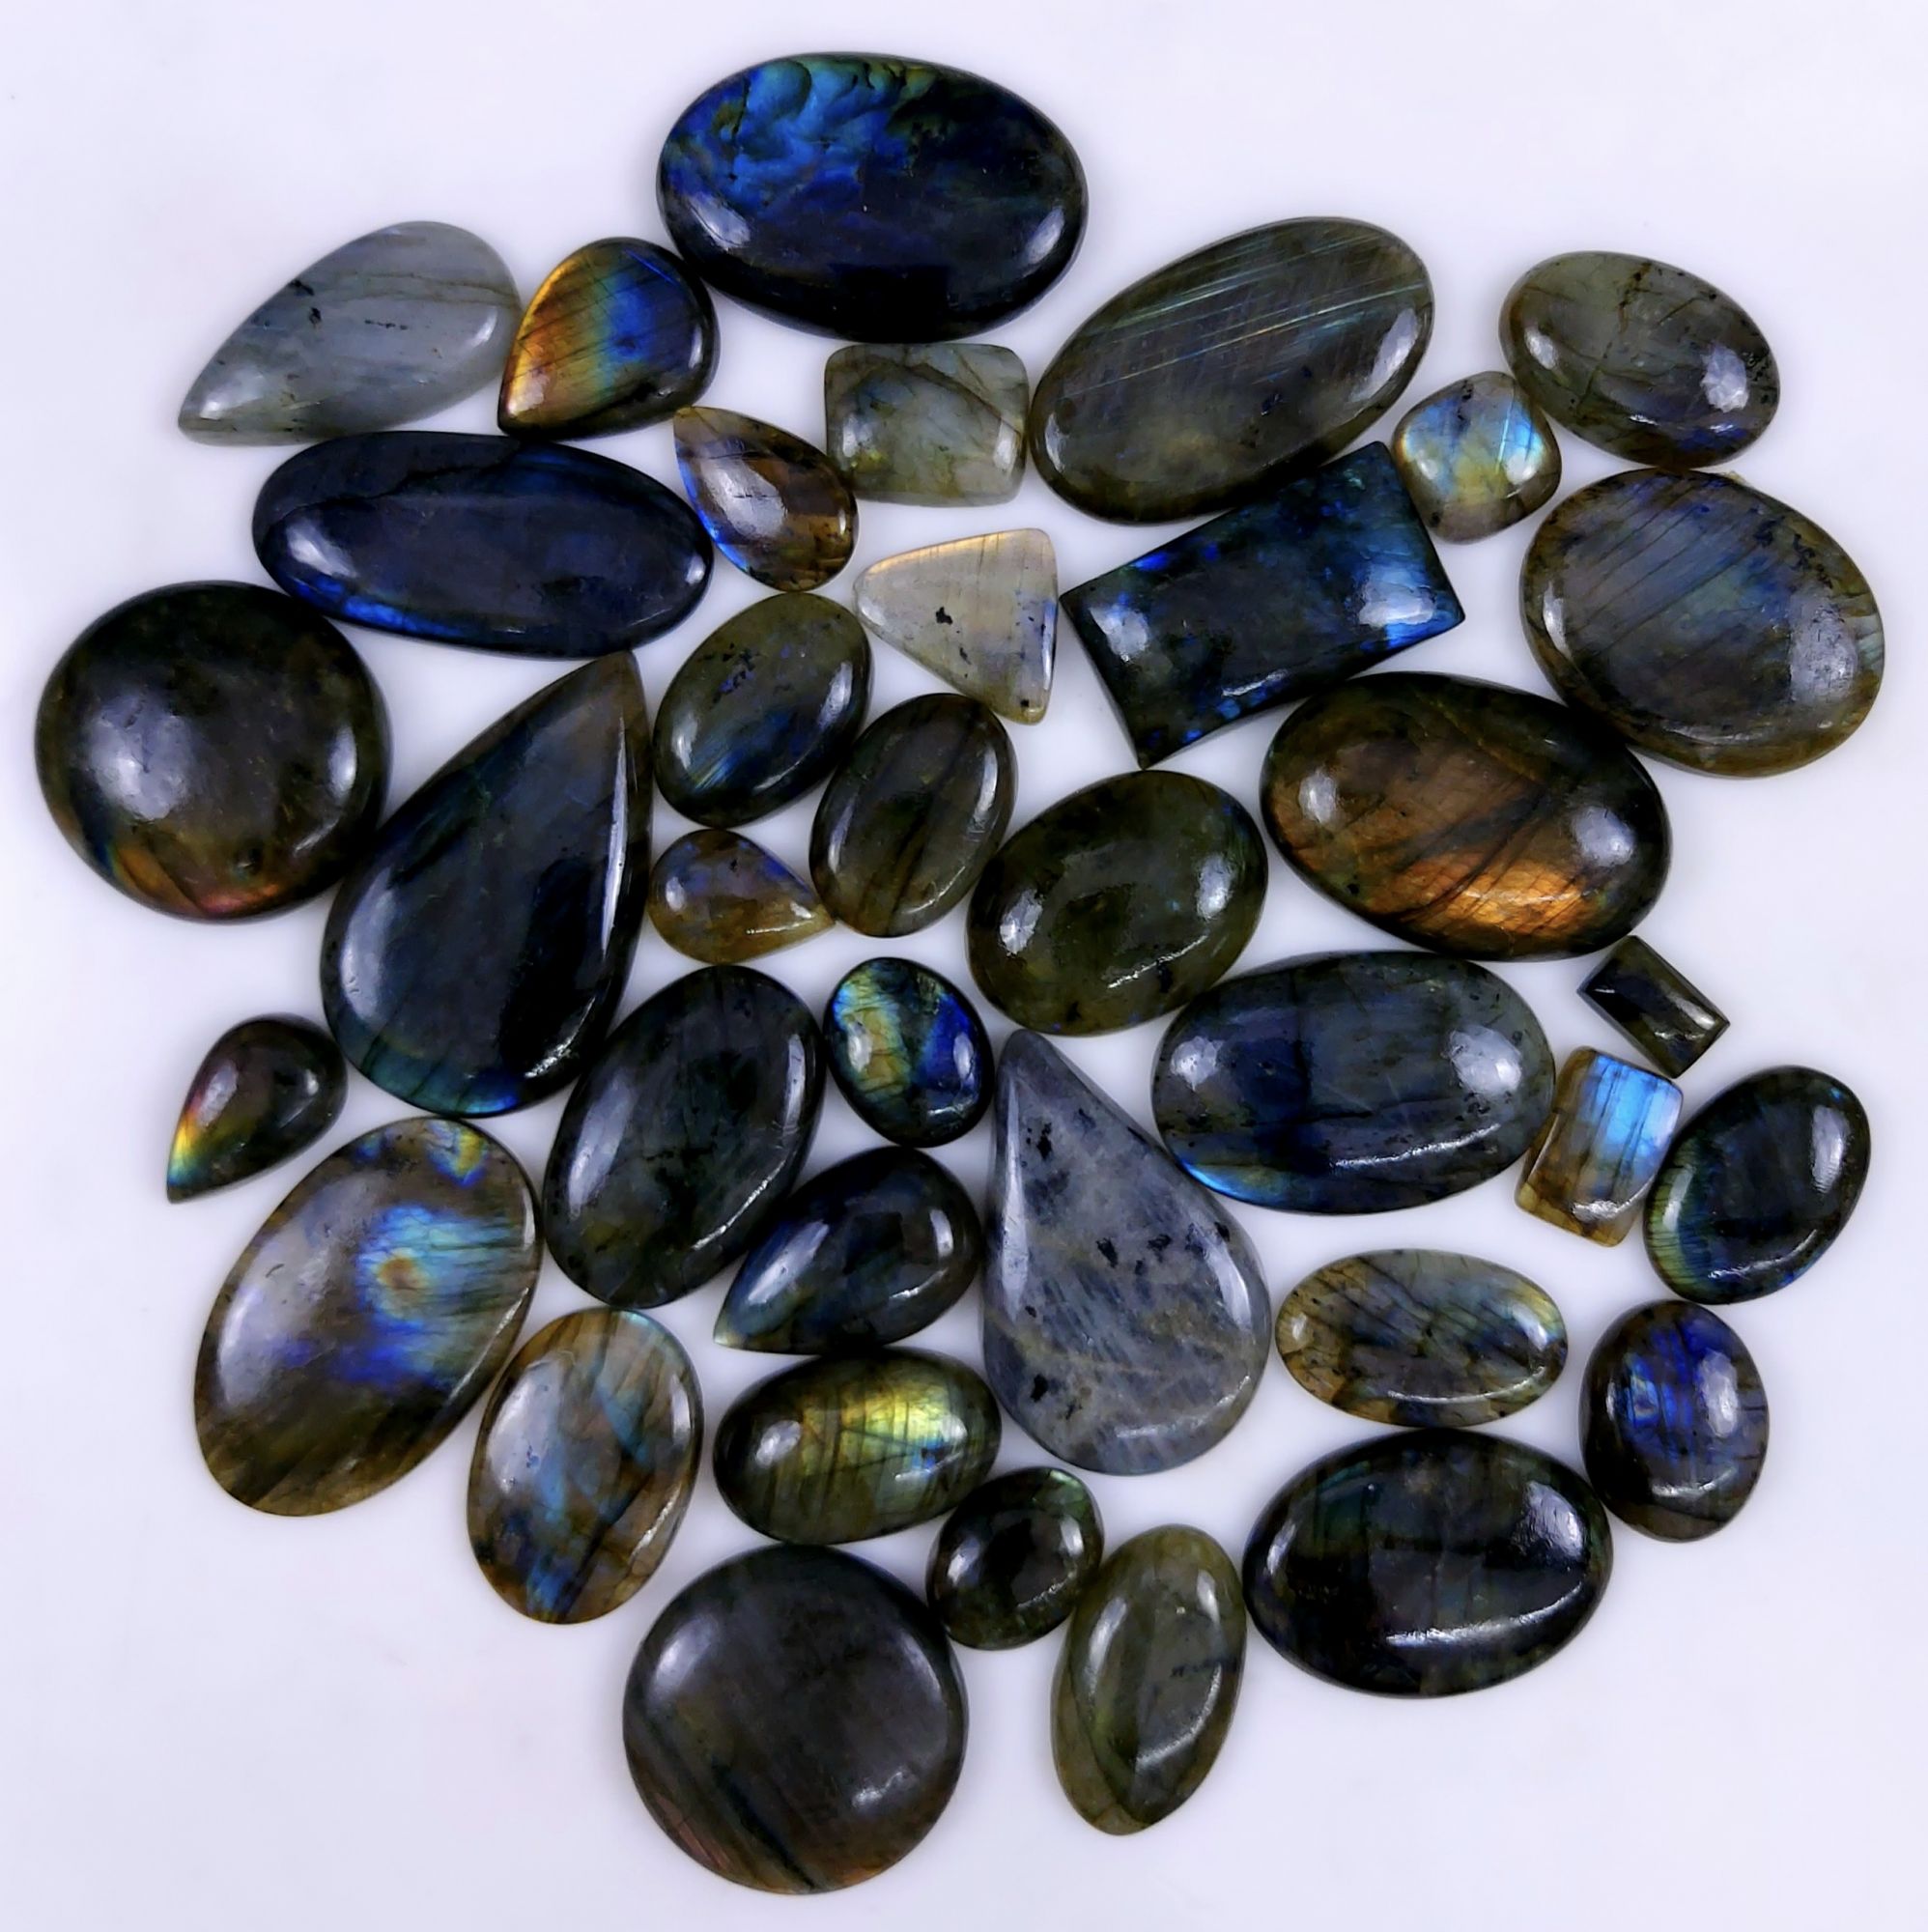 37pc 1511Cts Labradorite Cabochon Multifire Healing Crystal For Jewelry Supplies, Labradorite Necklace Handmade Wire Wrapped Gemstone Pendant 48x35 18x12mm#6318